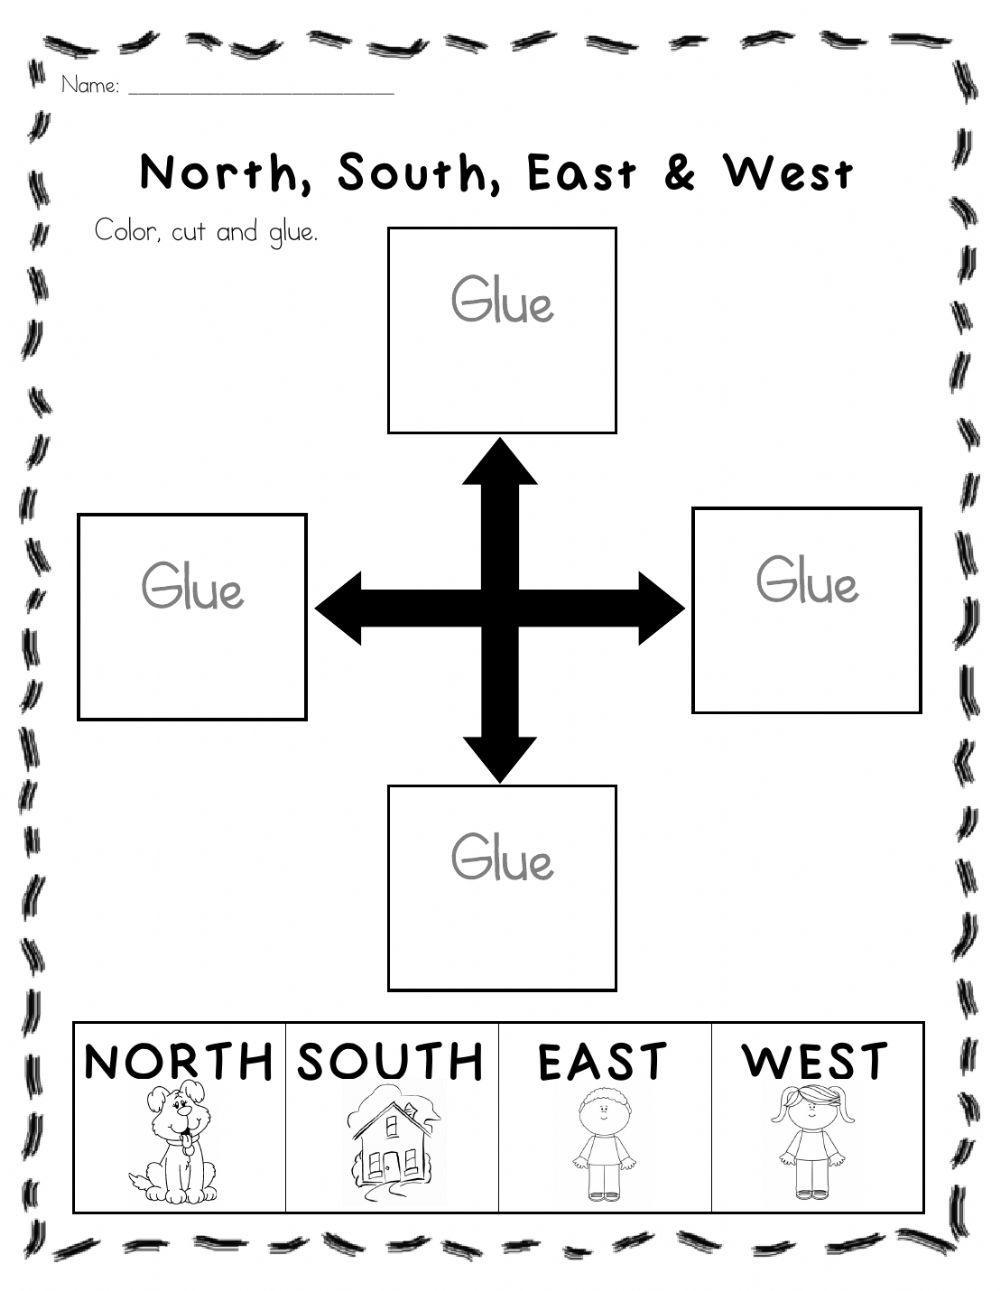 North South East and West